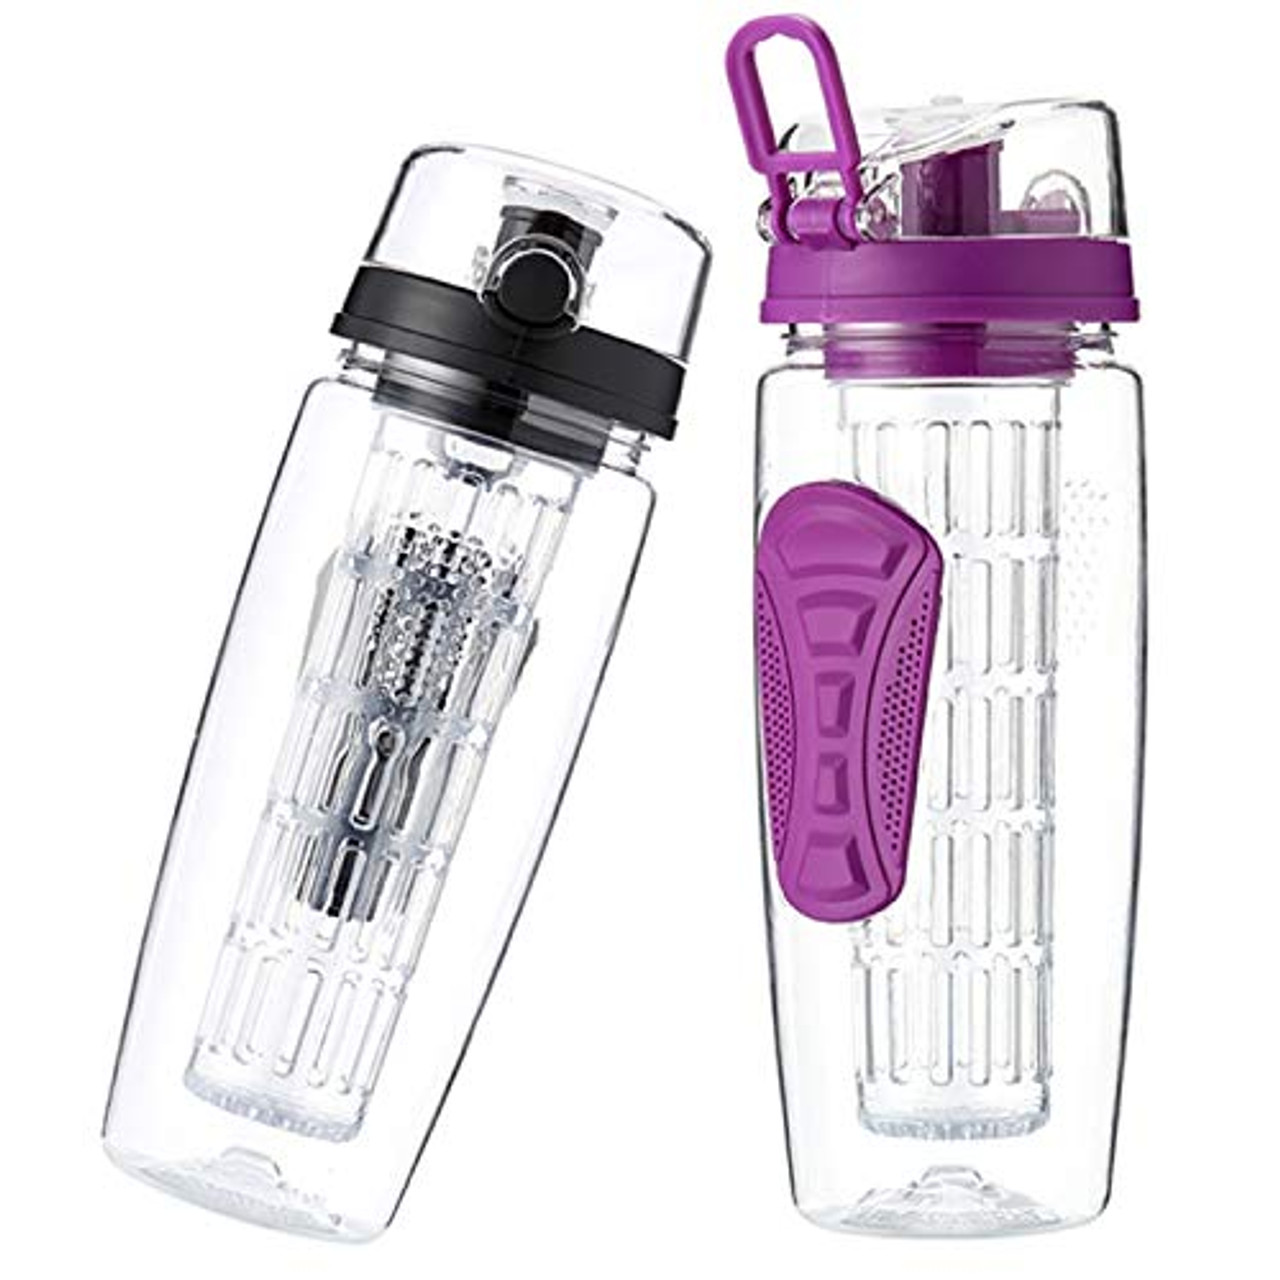 32 oz Glass Water Bottles With Times To Drink and Straw Lid - 1 Liter Glass  Drinking Bottle with Straw, Waterbottle (Ribbed Purple)